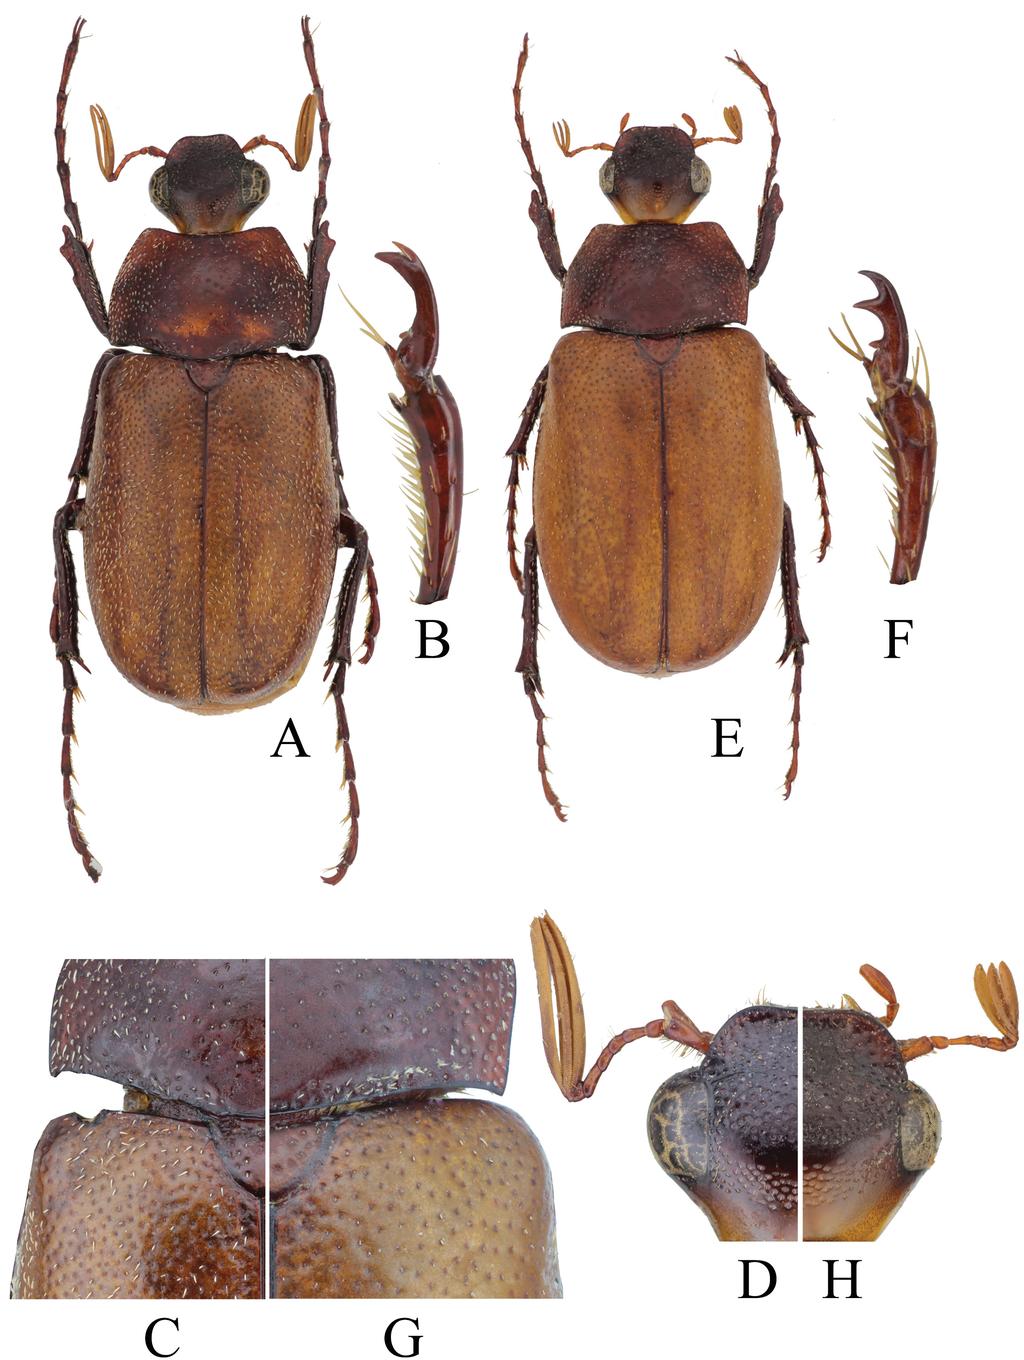 144 SEHNAL et al.: Revision of the Canuschiza insularis species group (Scarabaeidae) Figs 2A H. Canuschiza adah sp. nov., dorsal view: A D male, holotype, body length 13.